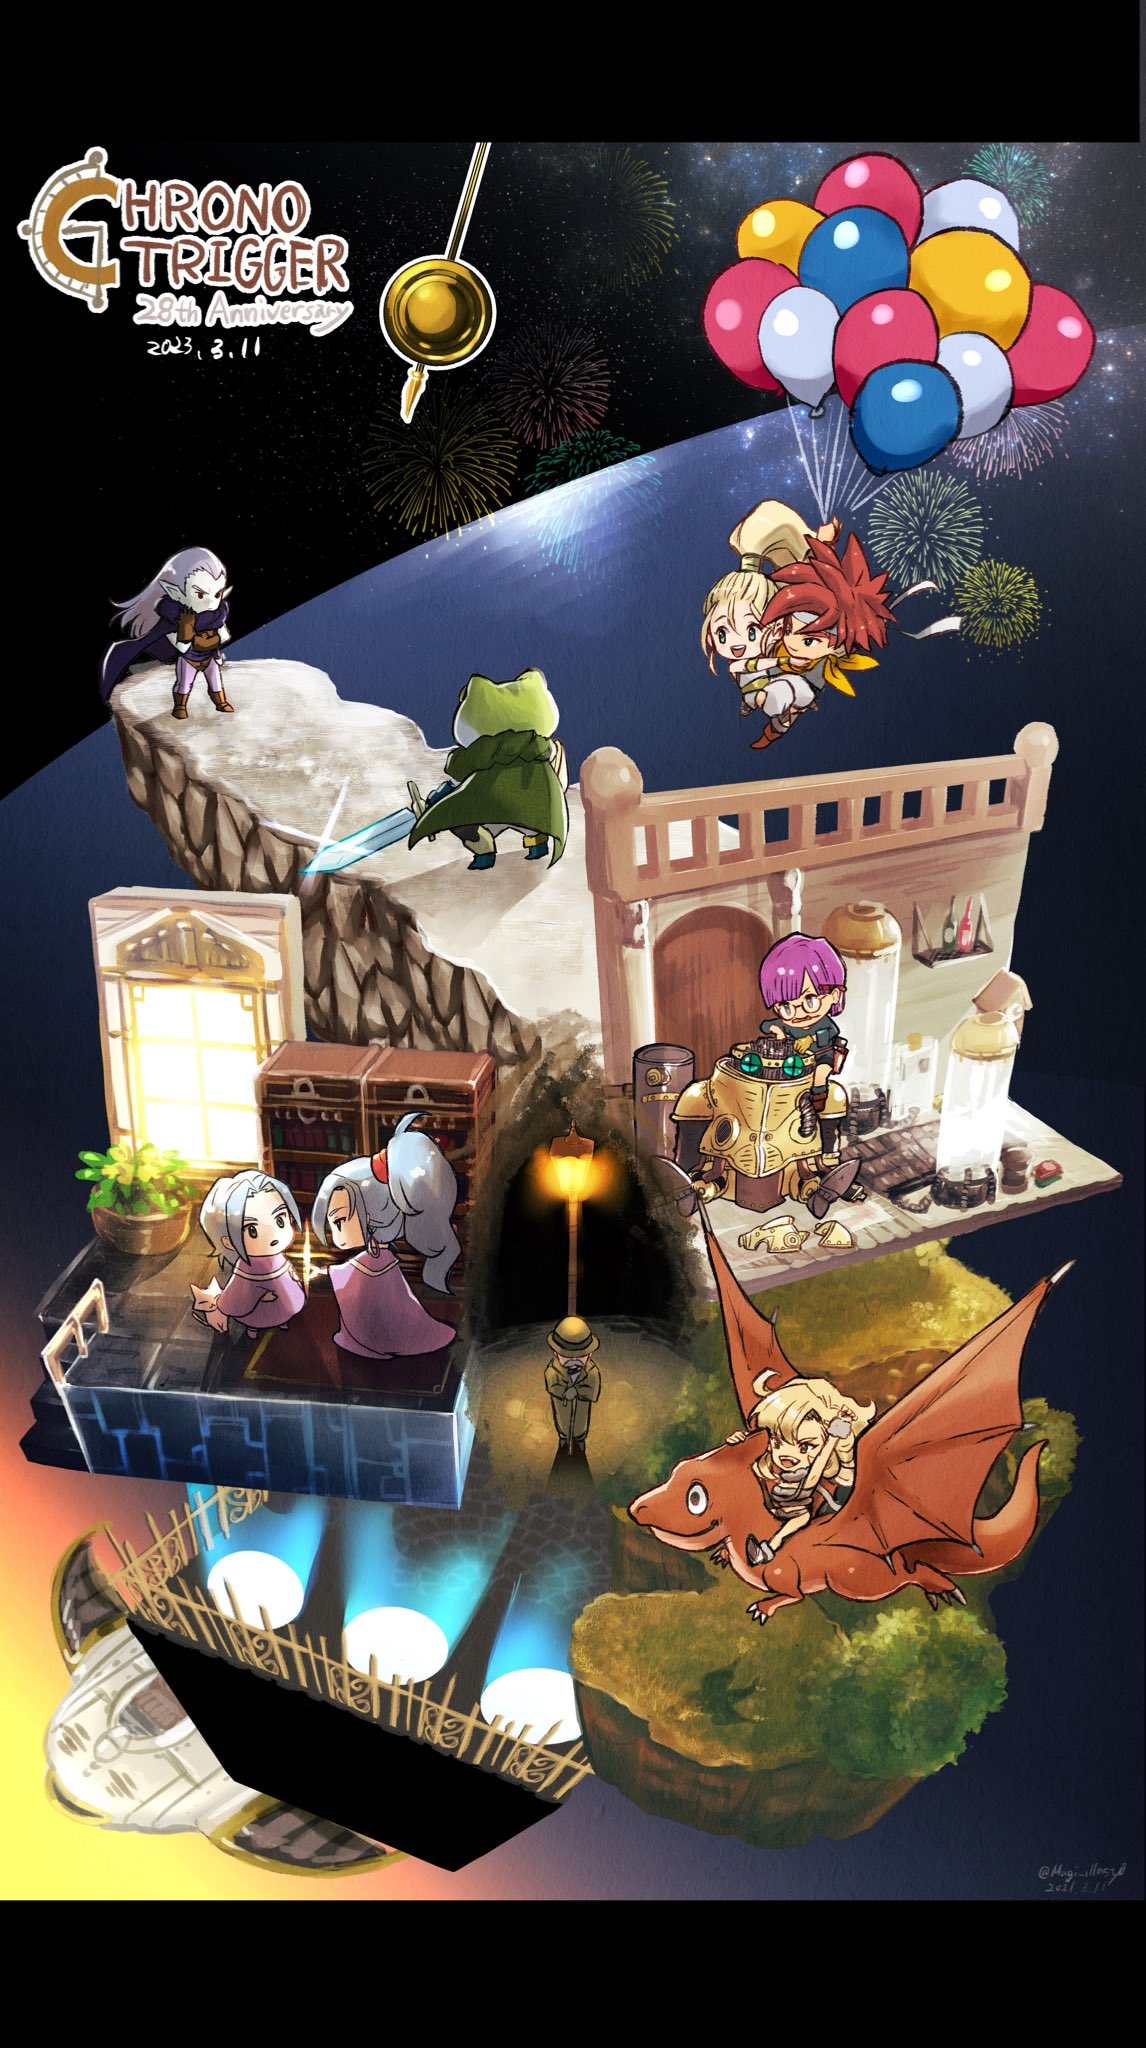 4girls 5boys alfador ayla_(chrono_trigger) blonde_hair chibi chrono_trigger commentary crono_(chrono_trigger) dinosaur epoch frog_(chrono_trigger) glasses headband highres jewelry komugiko_no_mori letterboxed long_hair lucca_ashtear magus_(chrono_trigger) marle_(chrono_trigger) melchior_(chrono_trigger) multiple_boys multiple_girls open_mouth ponytail purple_hair redhead robo_(chrono_trigger) robot schala_zeal short_hair smile spiky_hair sword symbol-only_commentary weapon